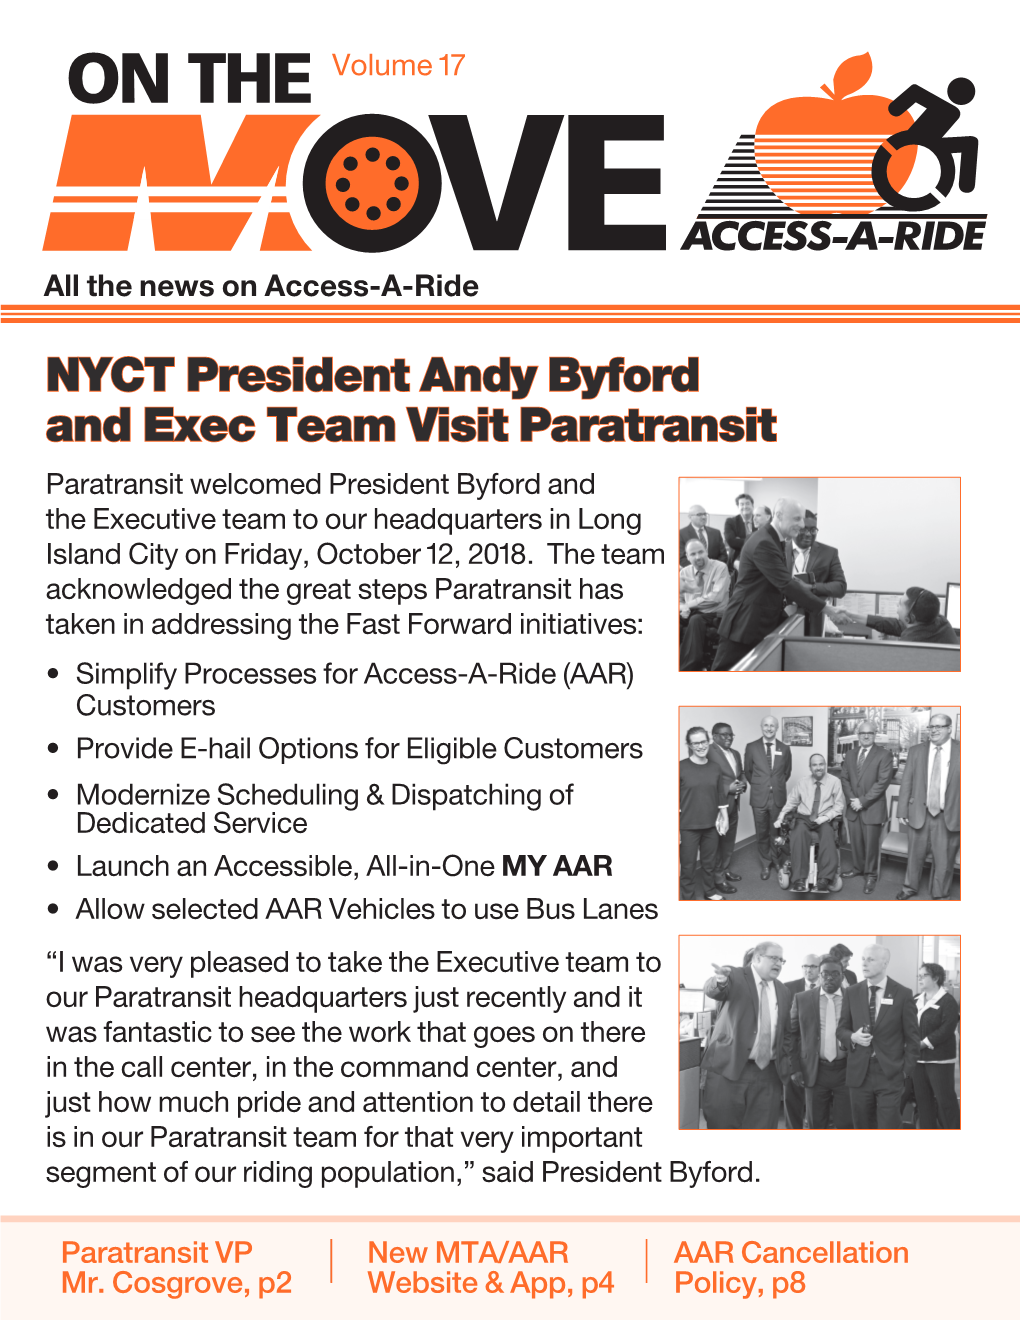 NYCT President Andy Byford and Exec Team Visit Paratransit